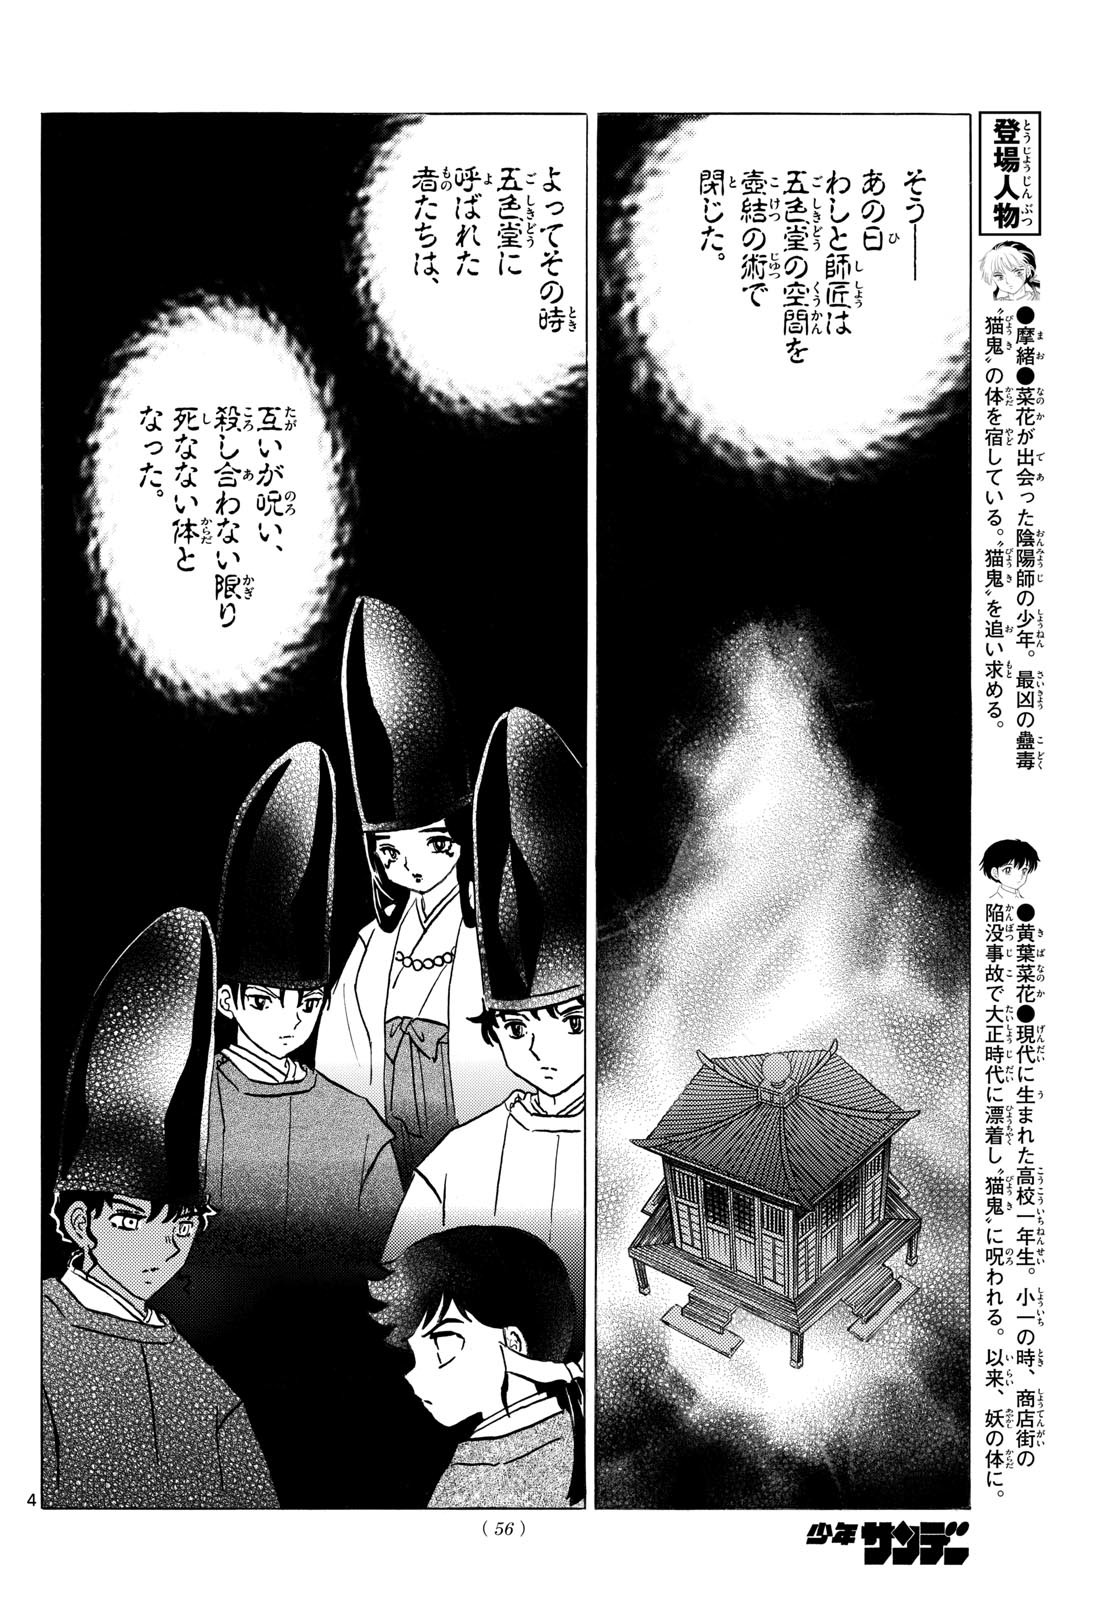 MAO - Chapter 224 - Page 4